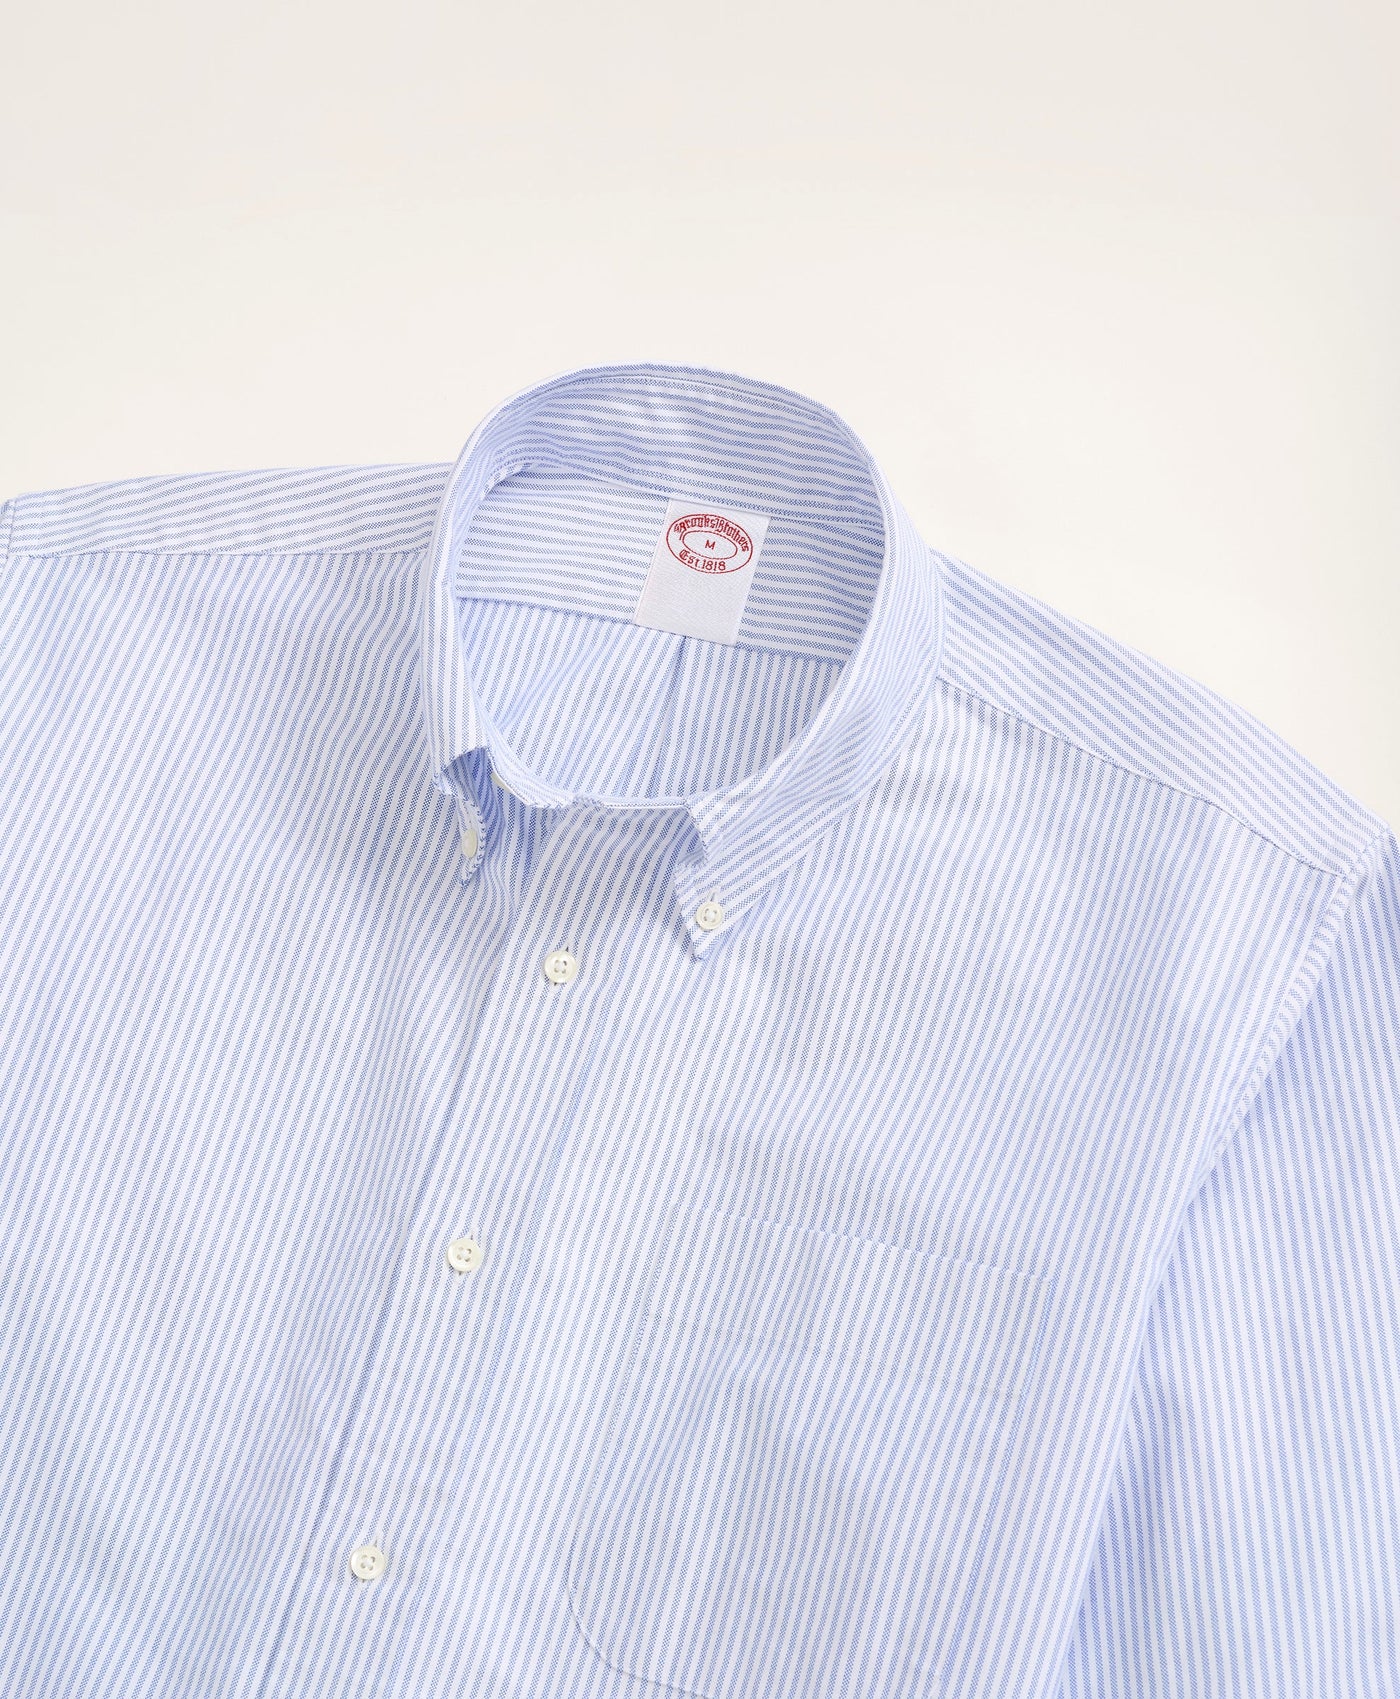 Milano Slim-Fit Original Polo® Button-Down Oxford Shirt, Candy stripe - Brooks Brothers Canada